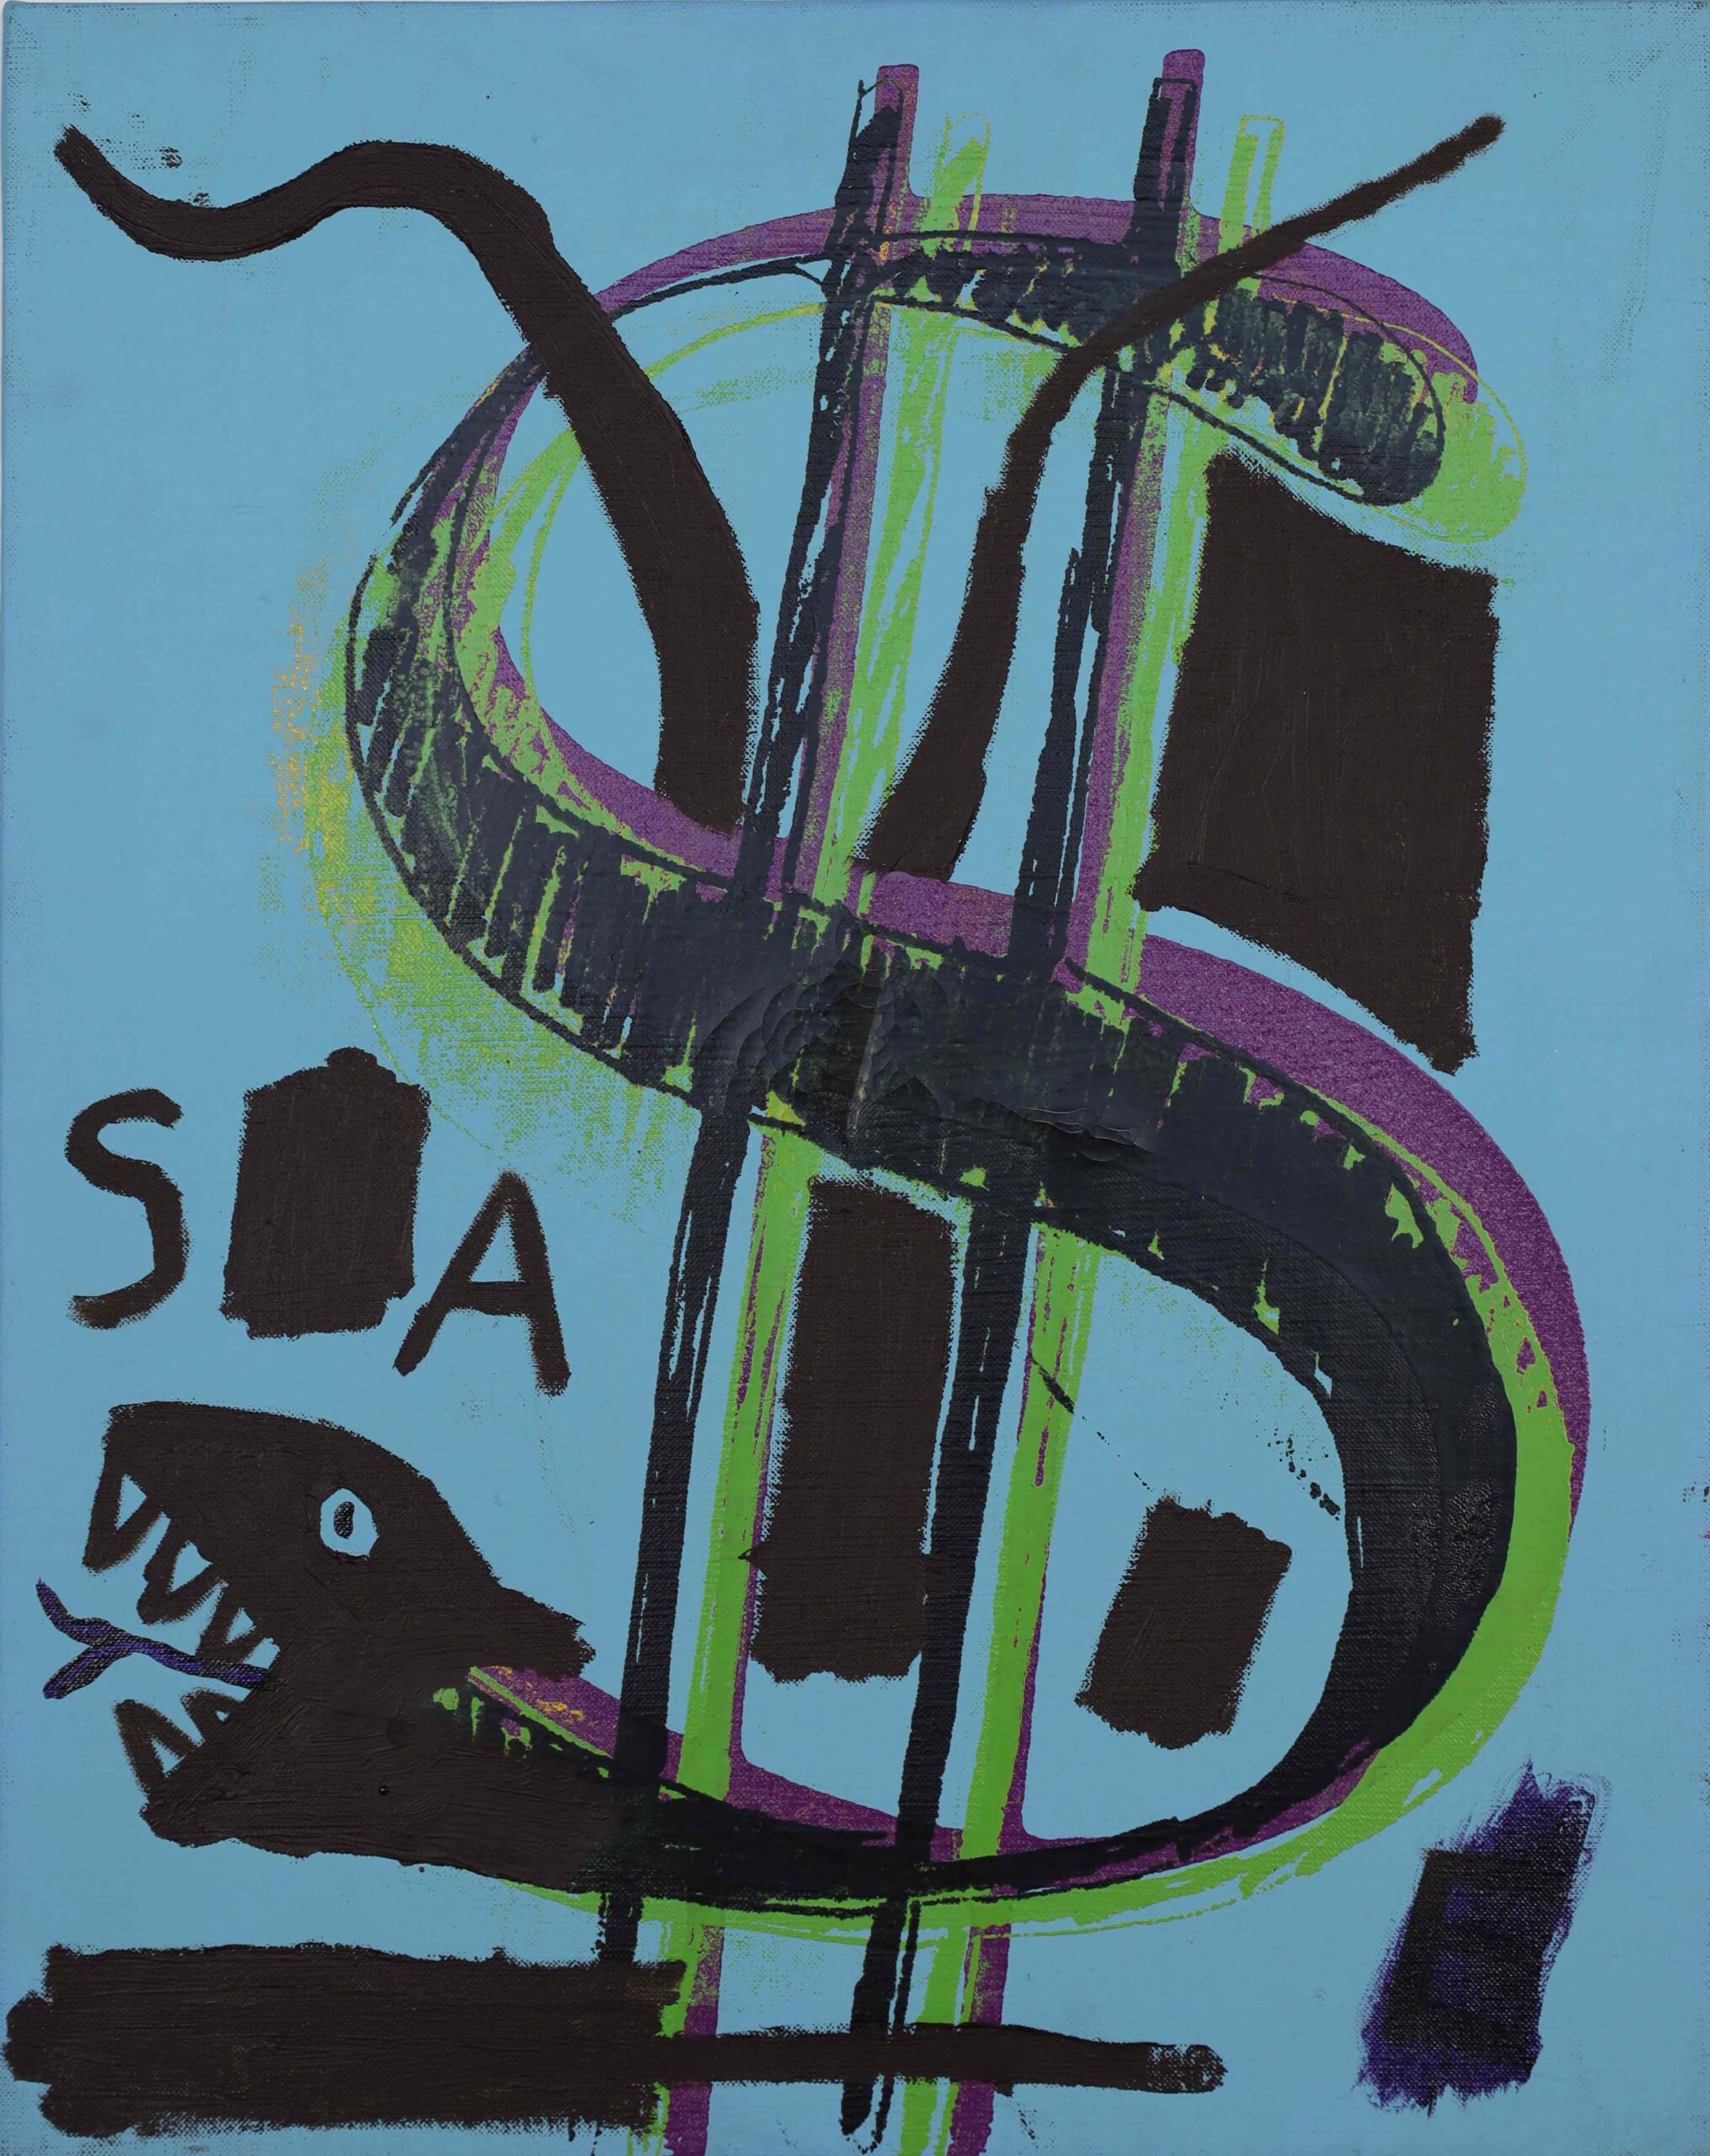 Jean-Michel Basquiat & Andy Warhol 
Untitled (Dollar Sign), c. 1984 - 1985

Synthetic polymer paint and silkscreen ink on canvas

20 x 16 in.